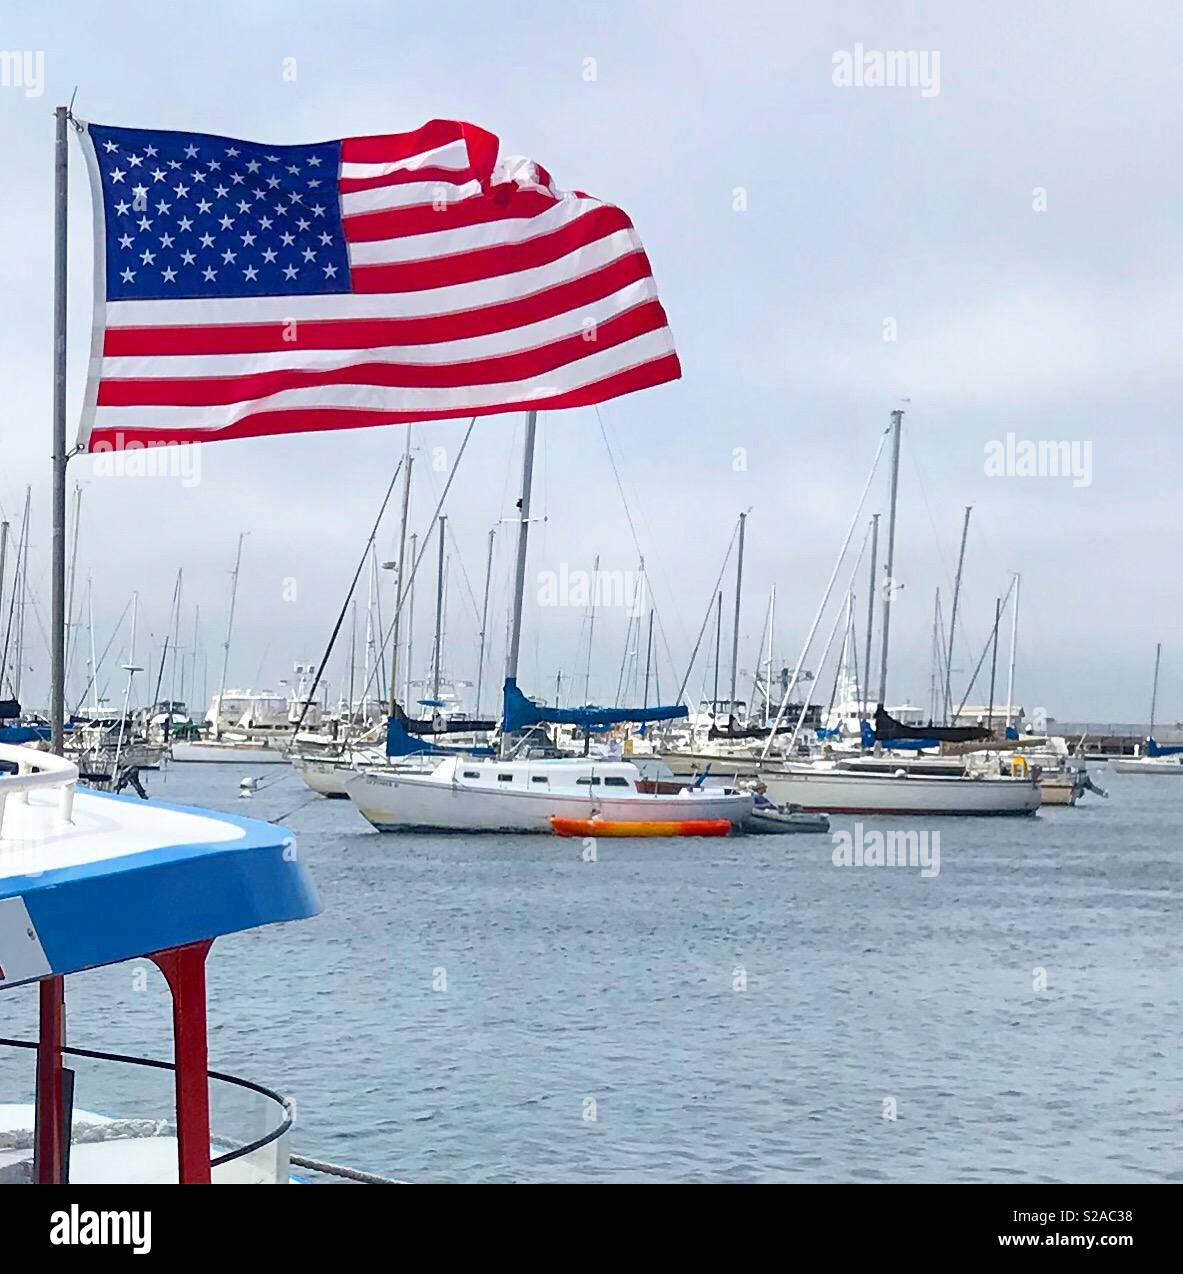 American flag flying on the side of a boat in Monterey Bay Stock Photo